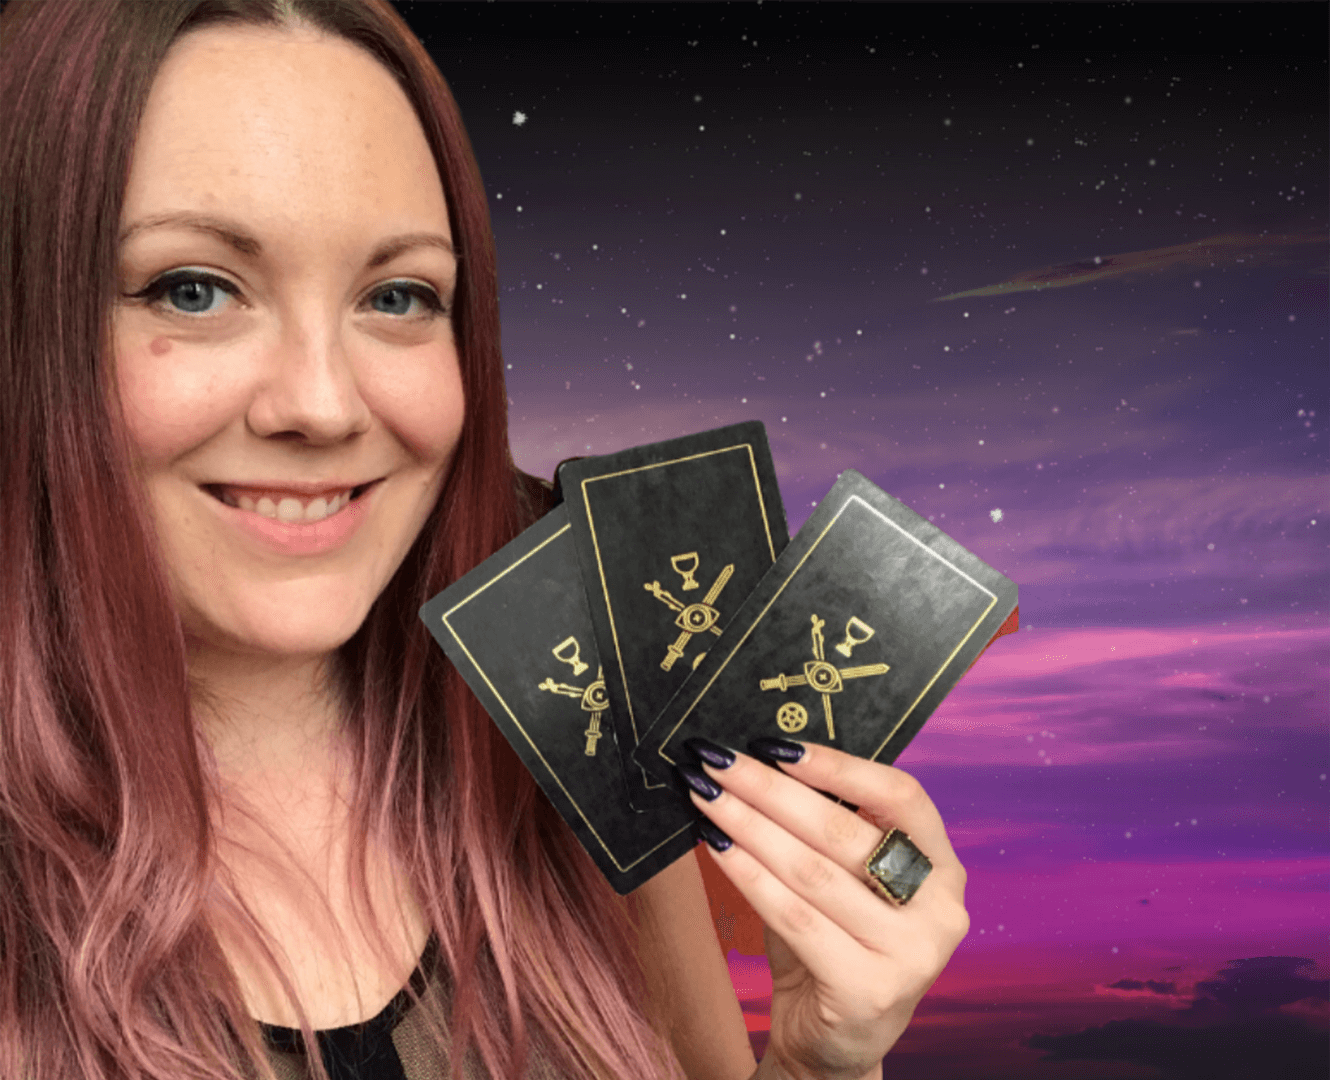 Woman holds tarot cards in front of purple sky backdrop.